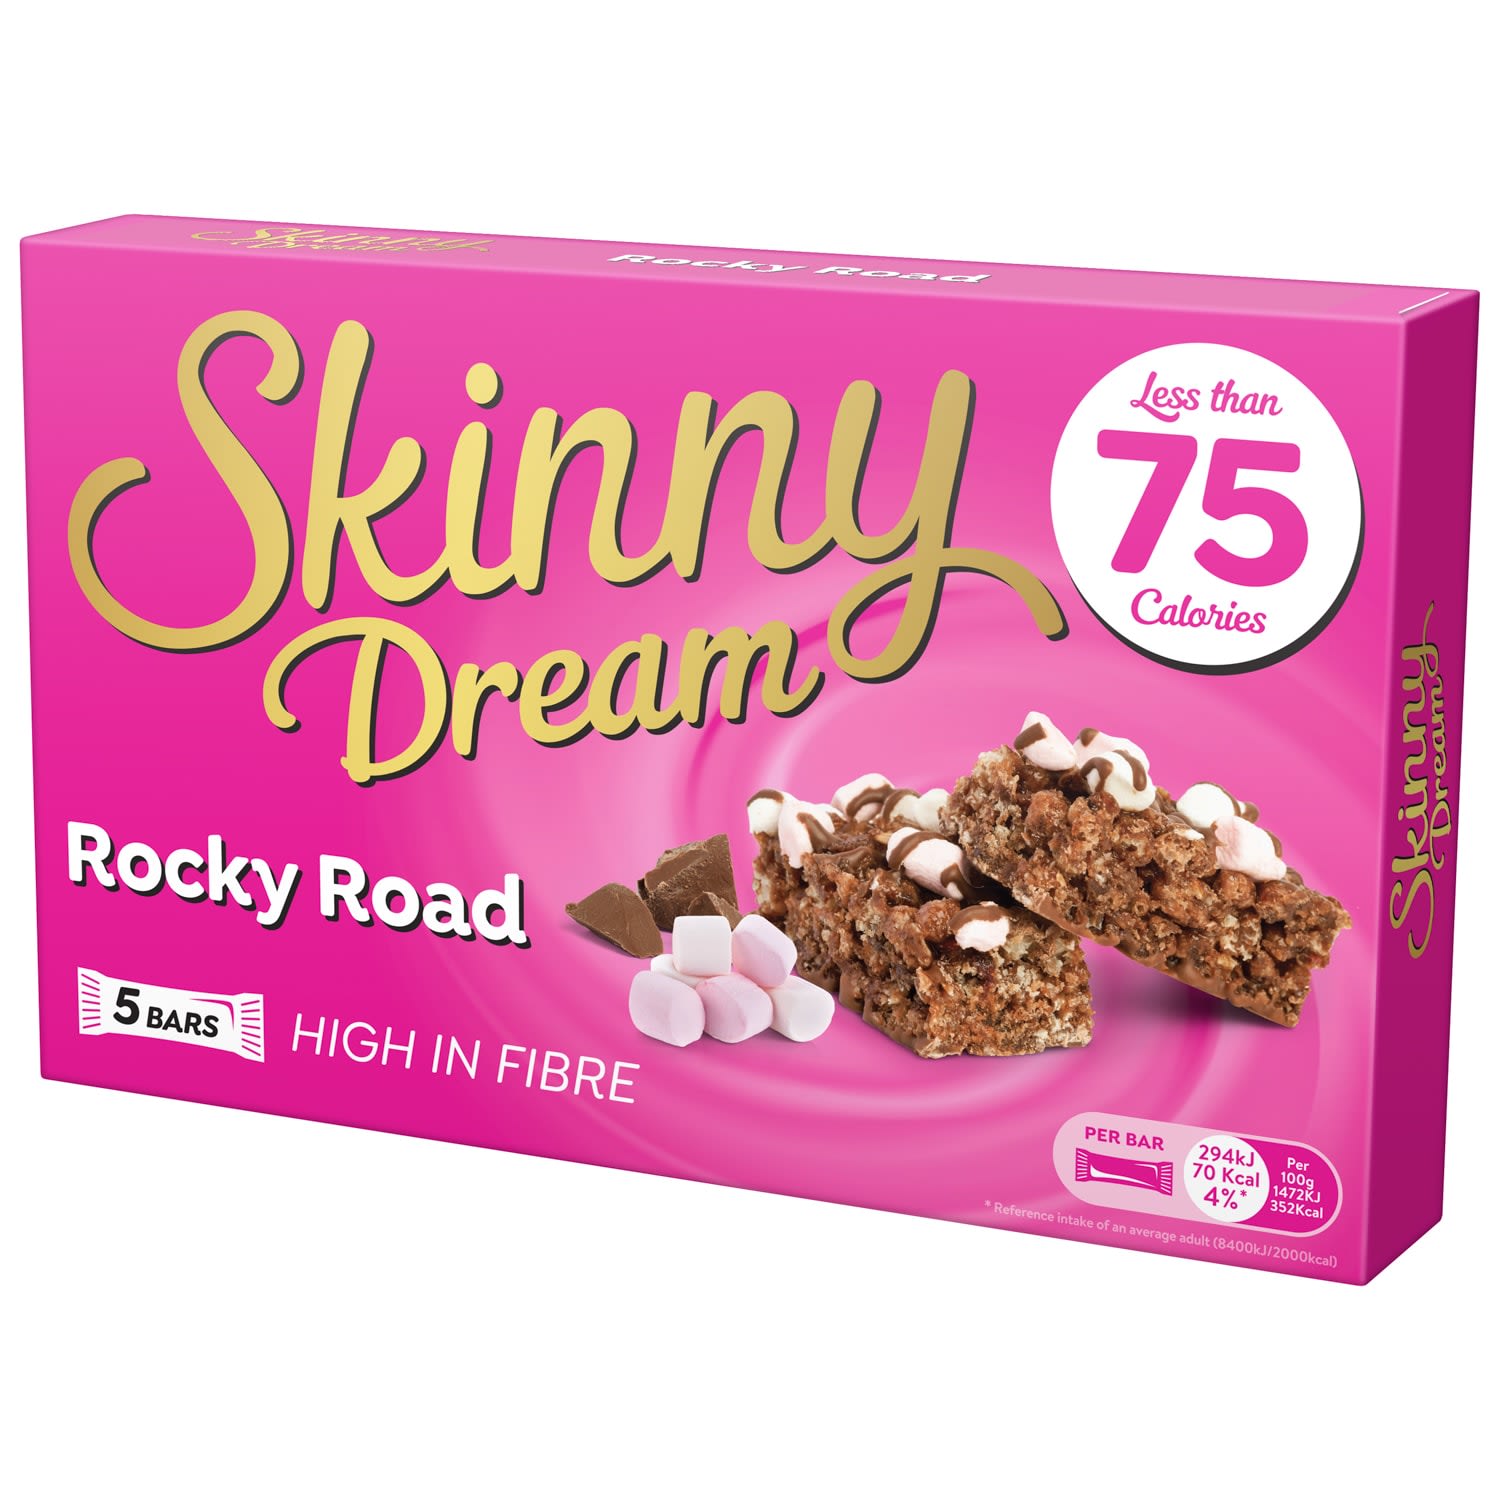 casey hoch recommends Rocky Roads Wet Dreams